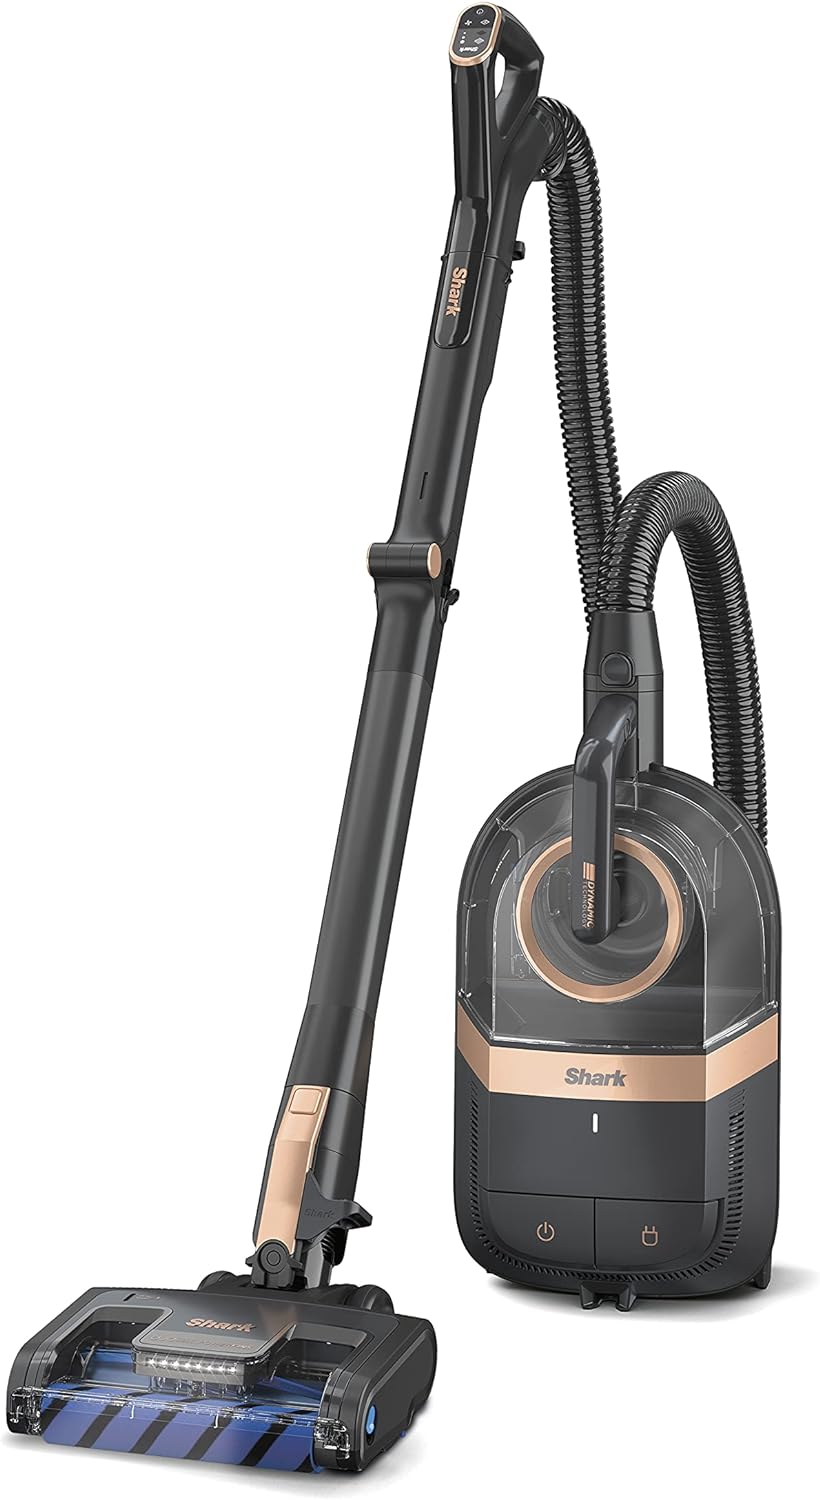 Shark CZ2001 Review: Powerful and Versatile Canister Vacuum